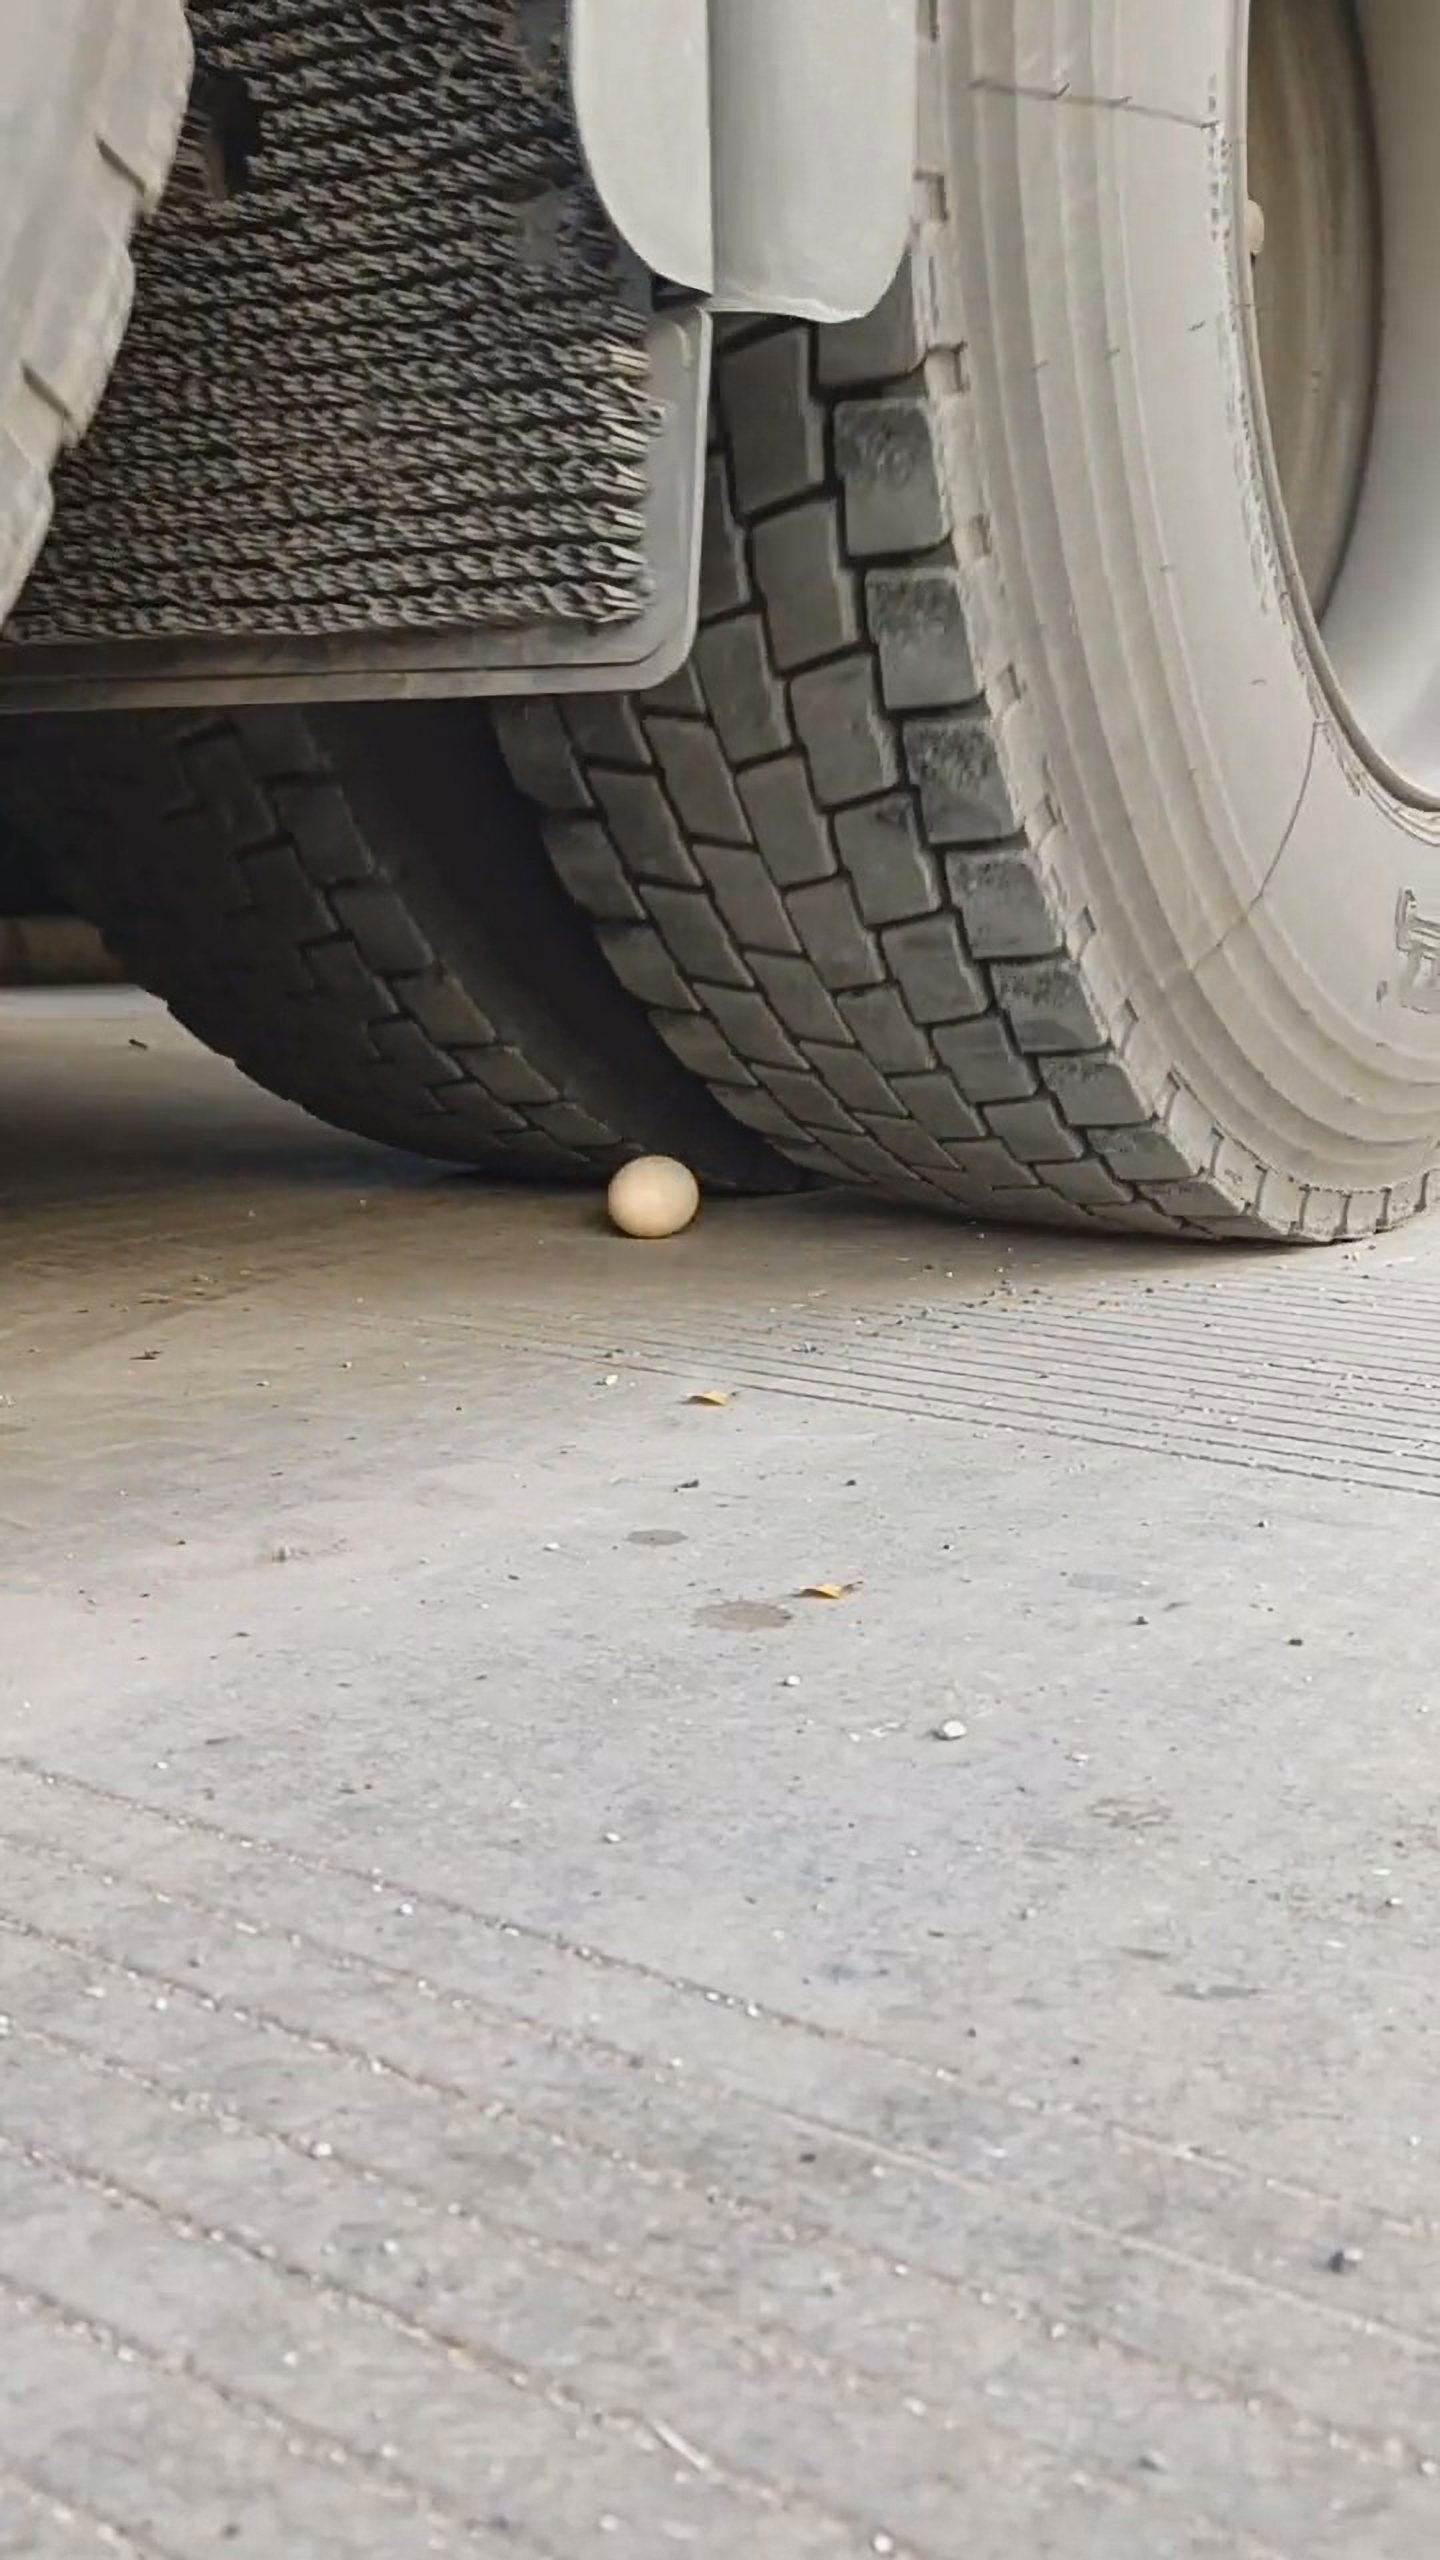 Read more about the article Lorry Driver Shows Off Skills By Driving Over Egg On Ground Without Breaking It